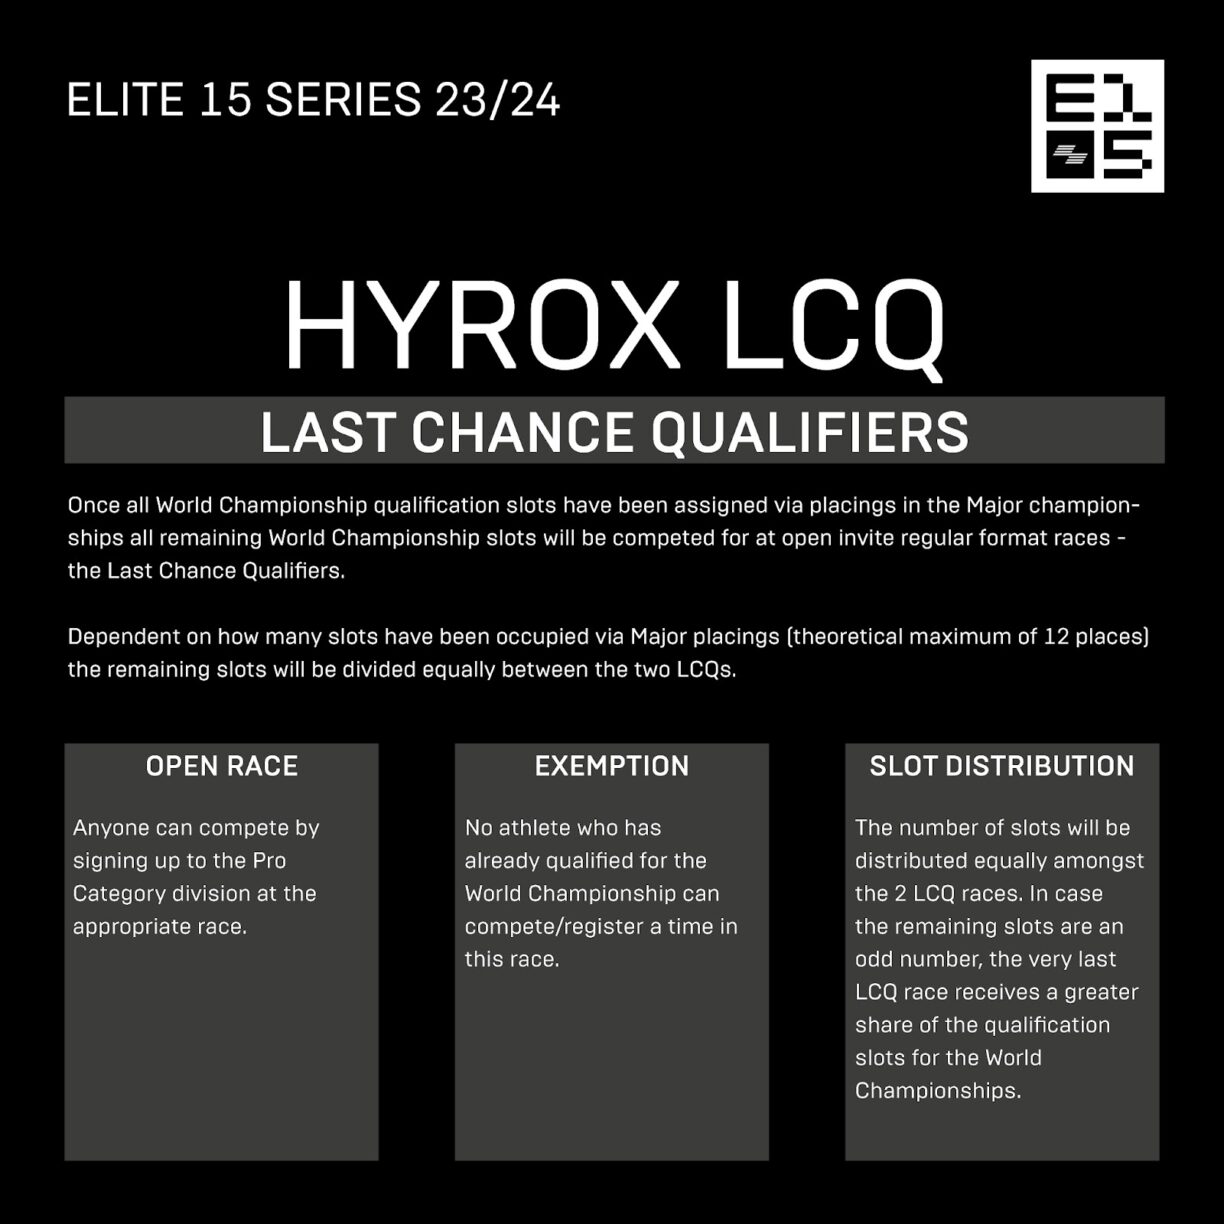 Hyrox last chance qualifiers infographic